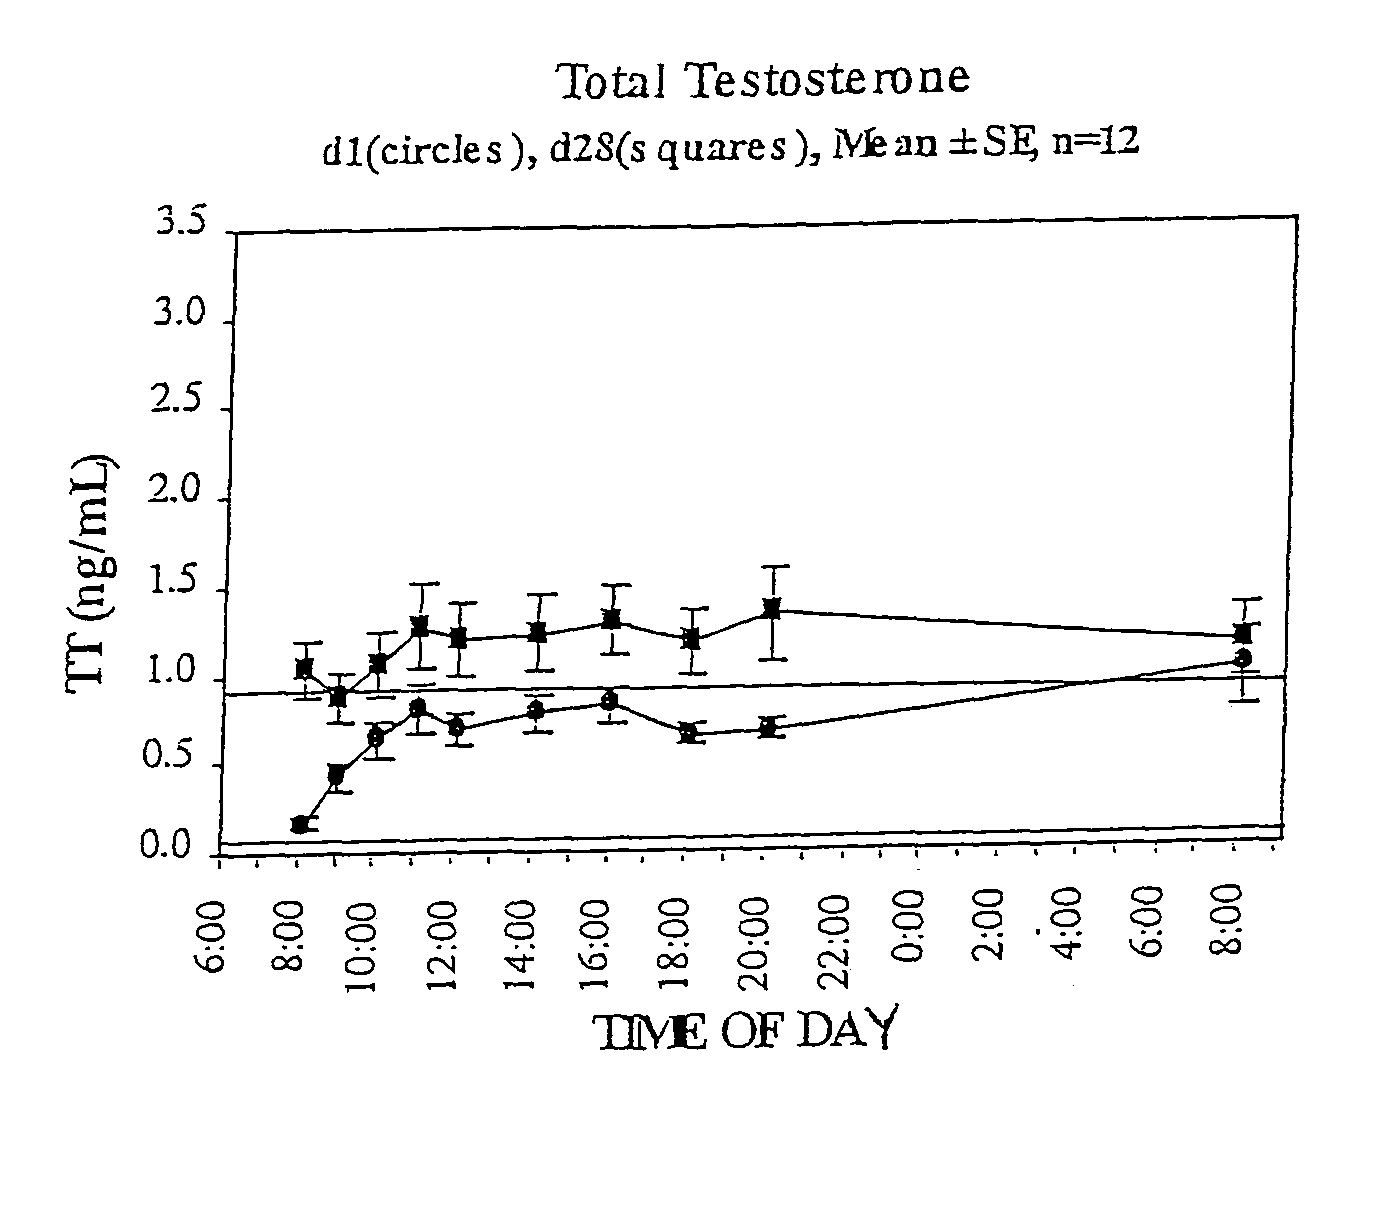 Transdermal compositions and methods for treatment of fibromyalgia and chronic fatigue syndrome